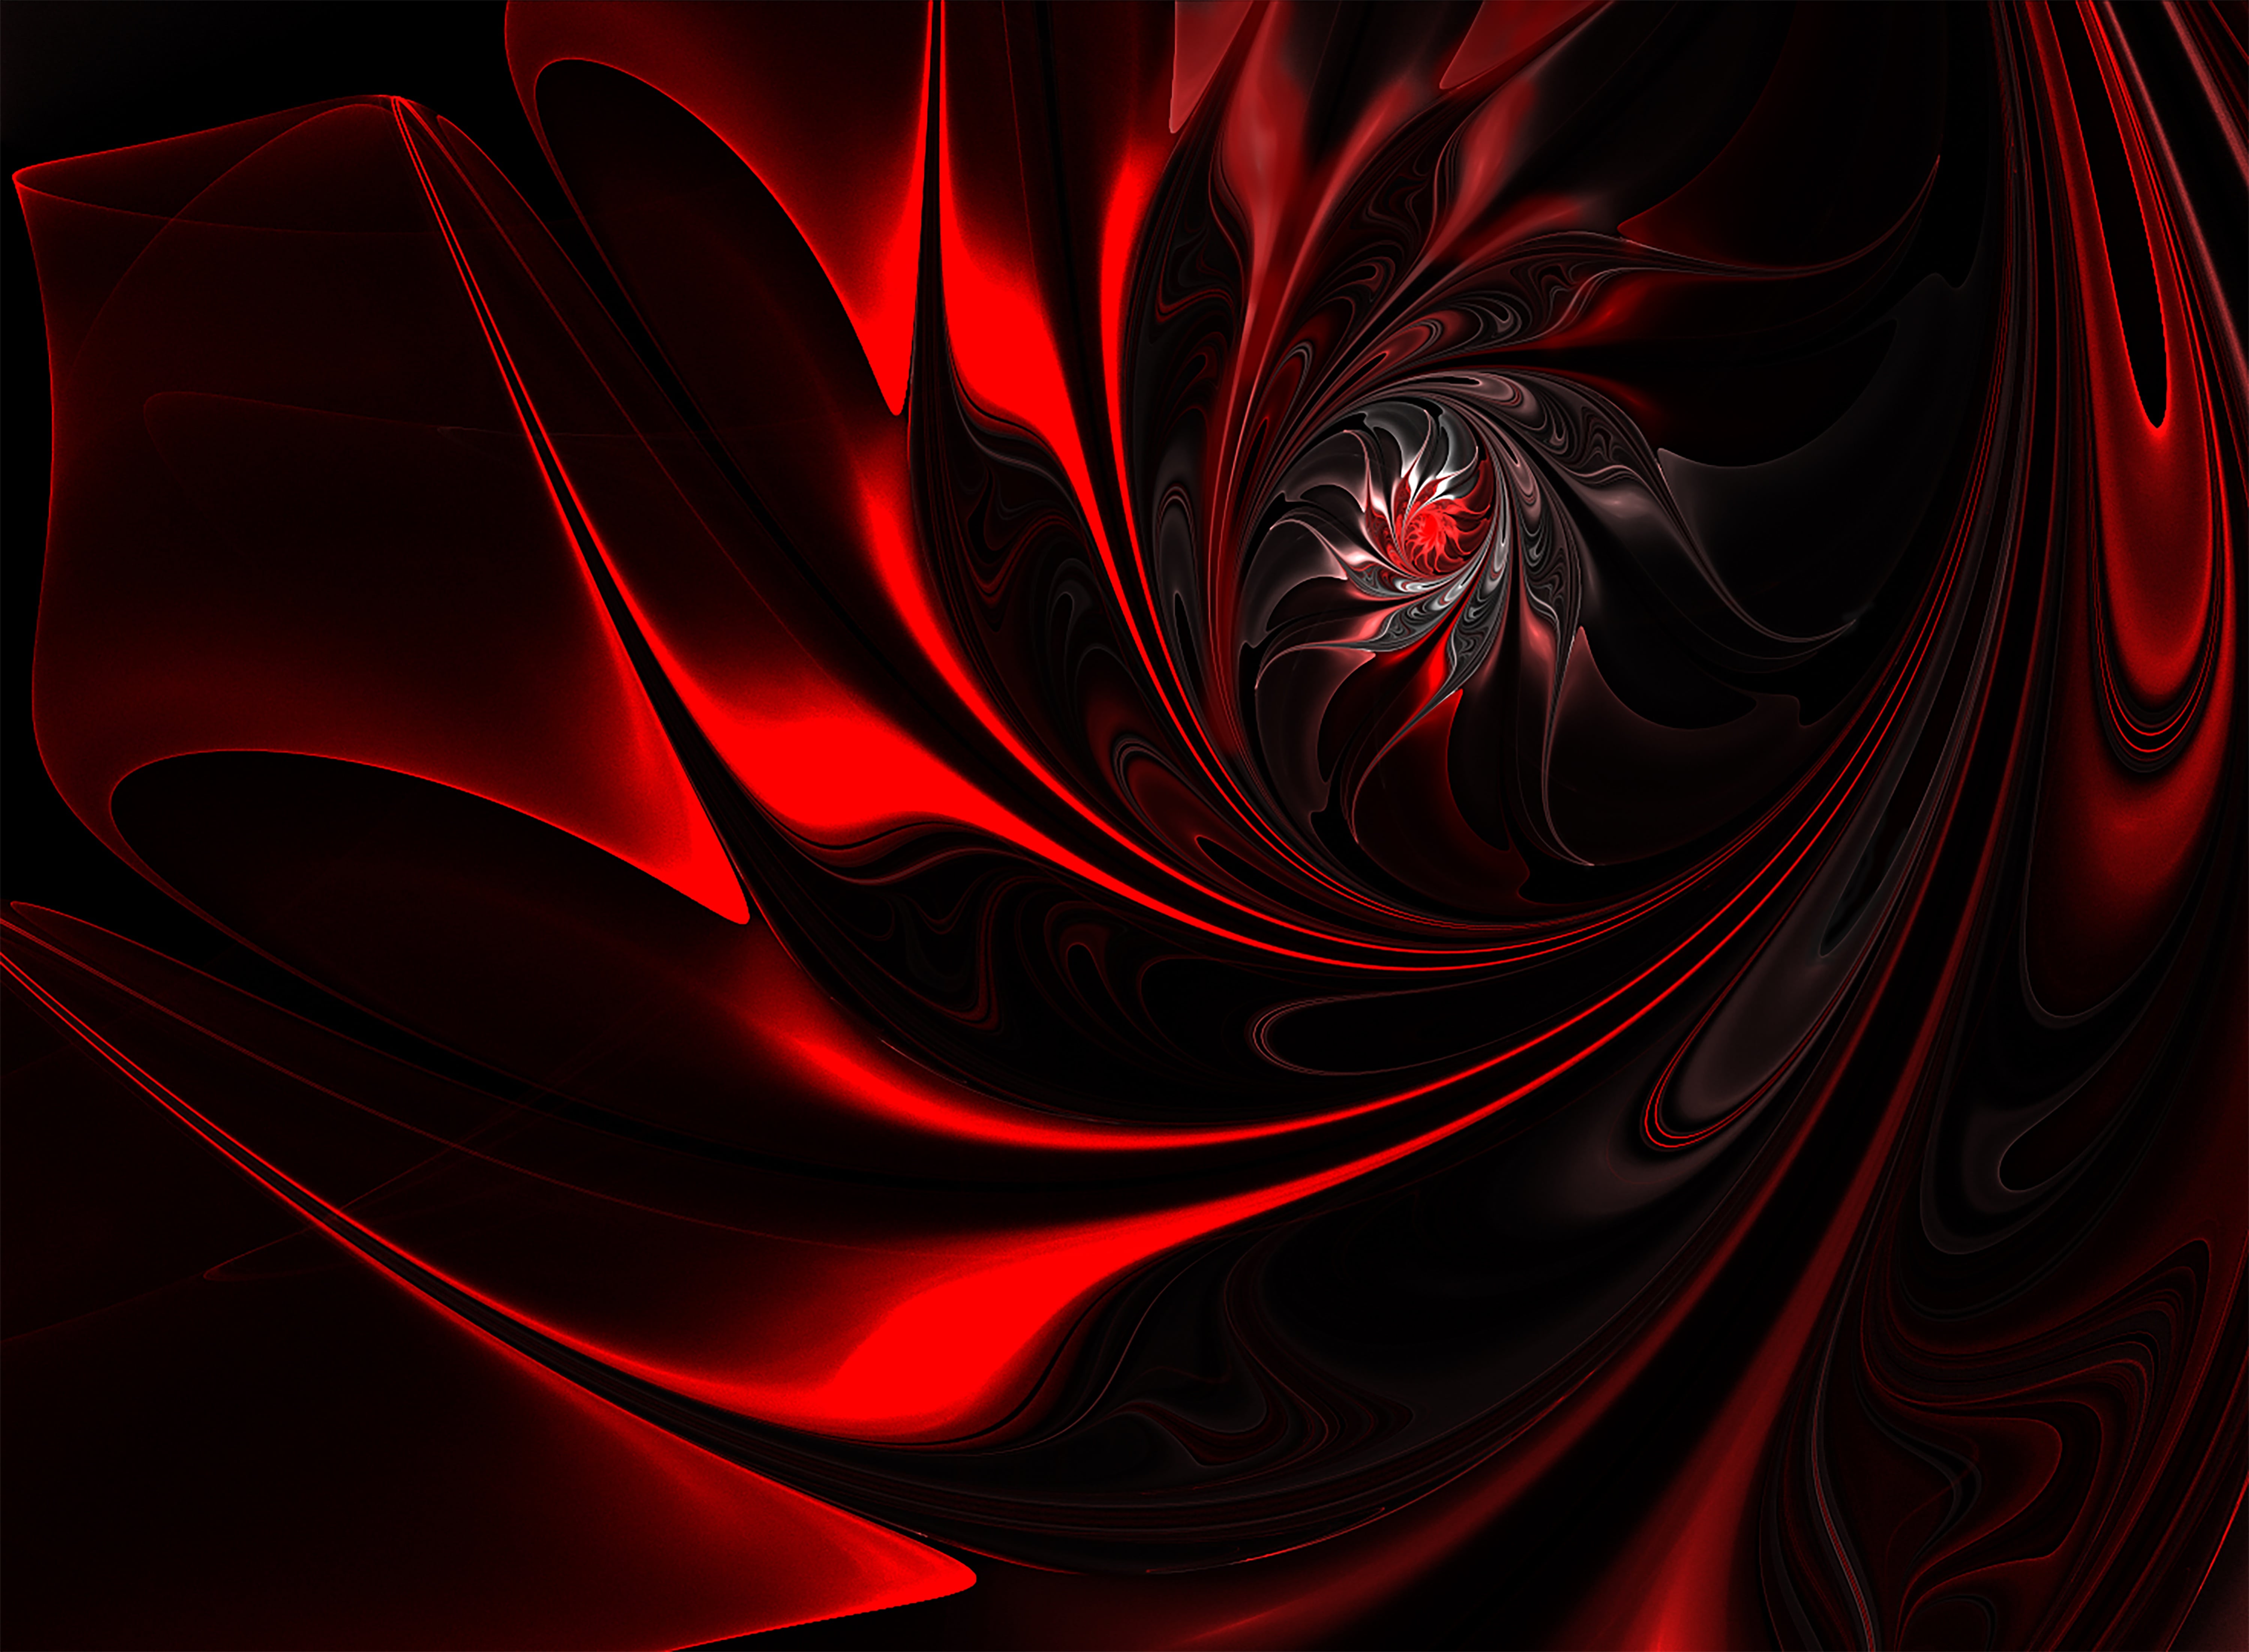 Abstract Curve Dark Flame Pattern - Red And Black Design , HD Wallpaper & Backgrounds